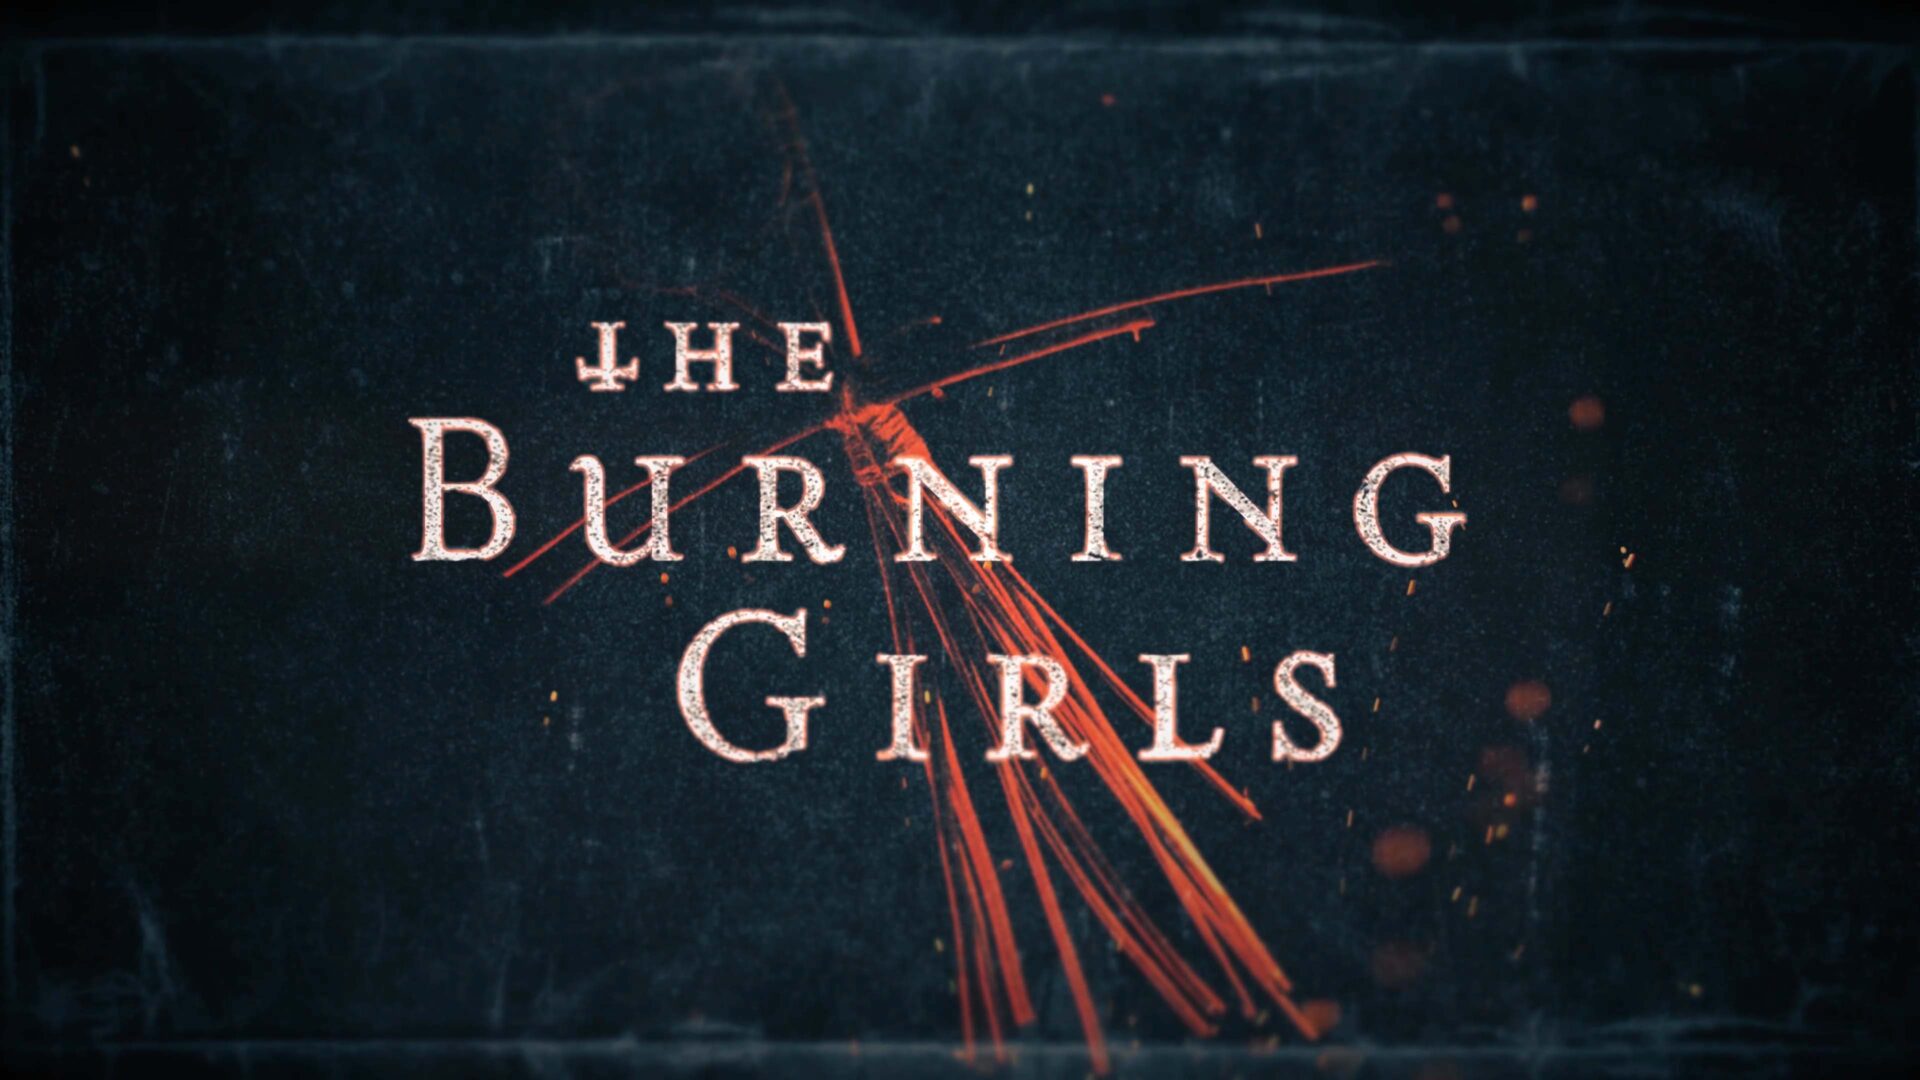 Peter_Anderson_Studio-The_Burning_Girls-Title_Sequence_14